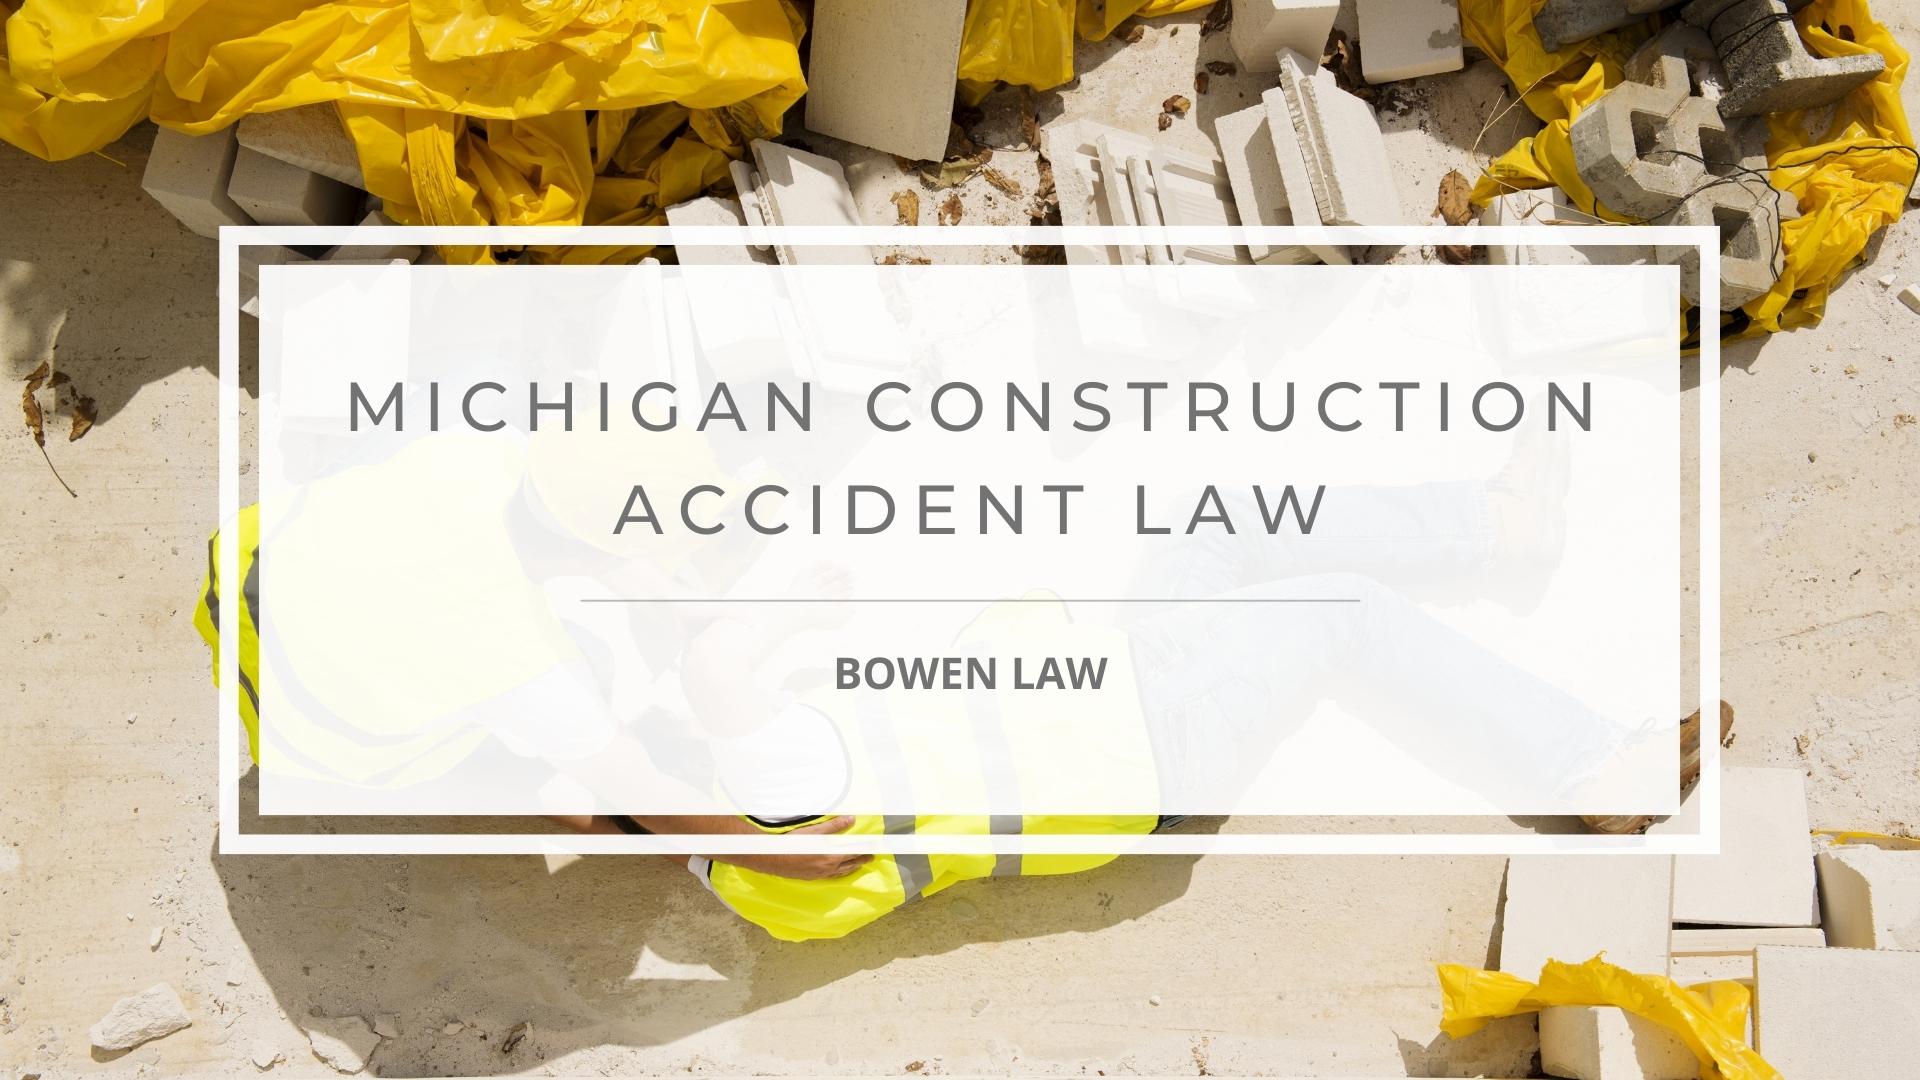 Featured image of michigan construction accident law